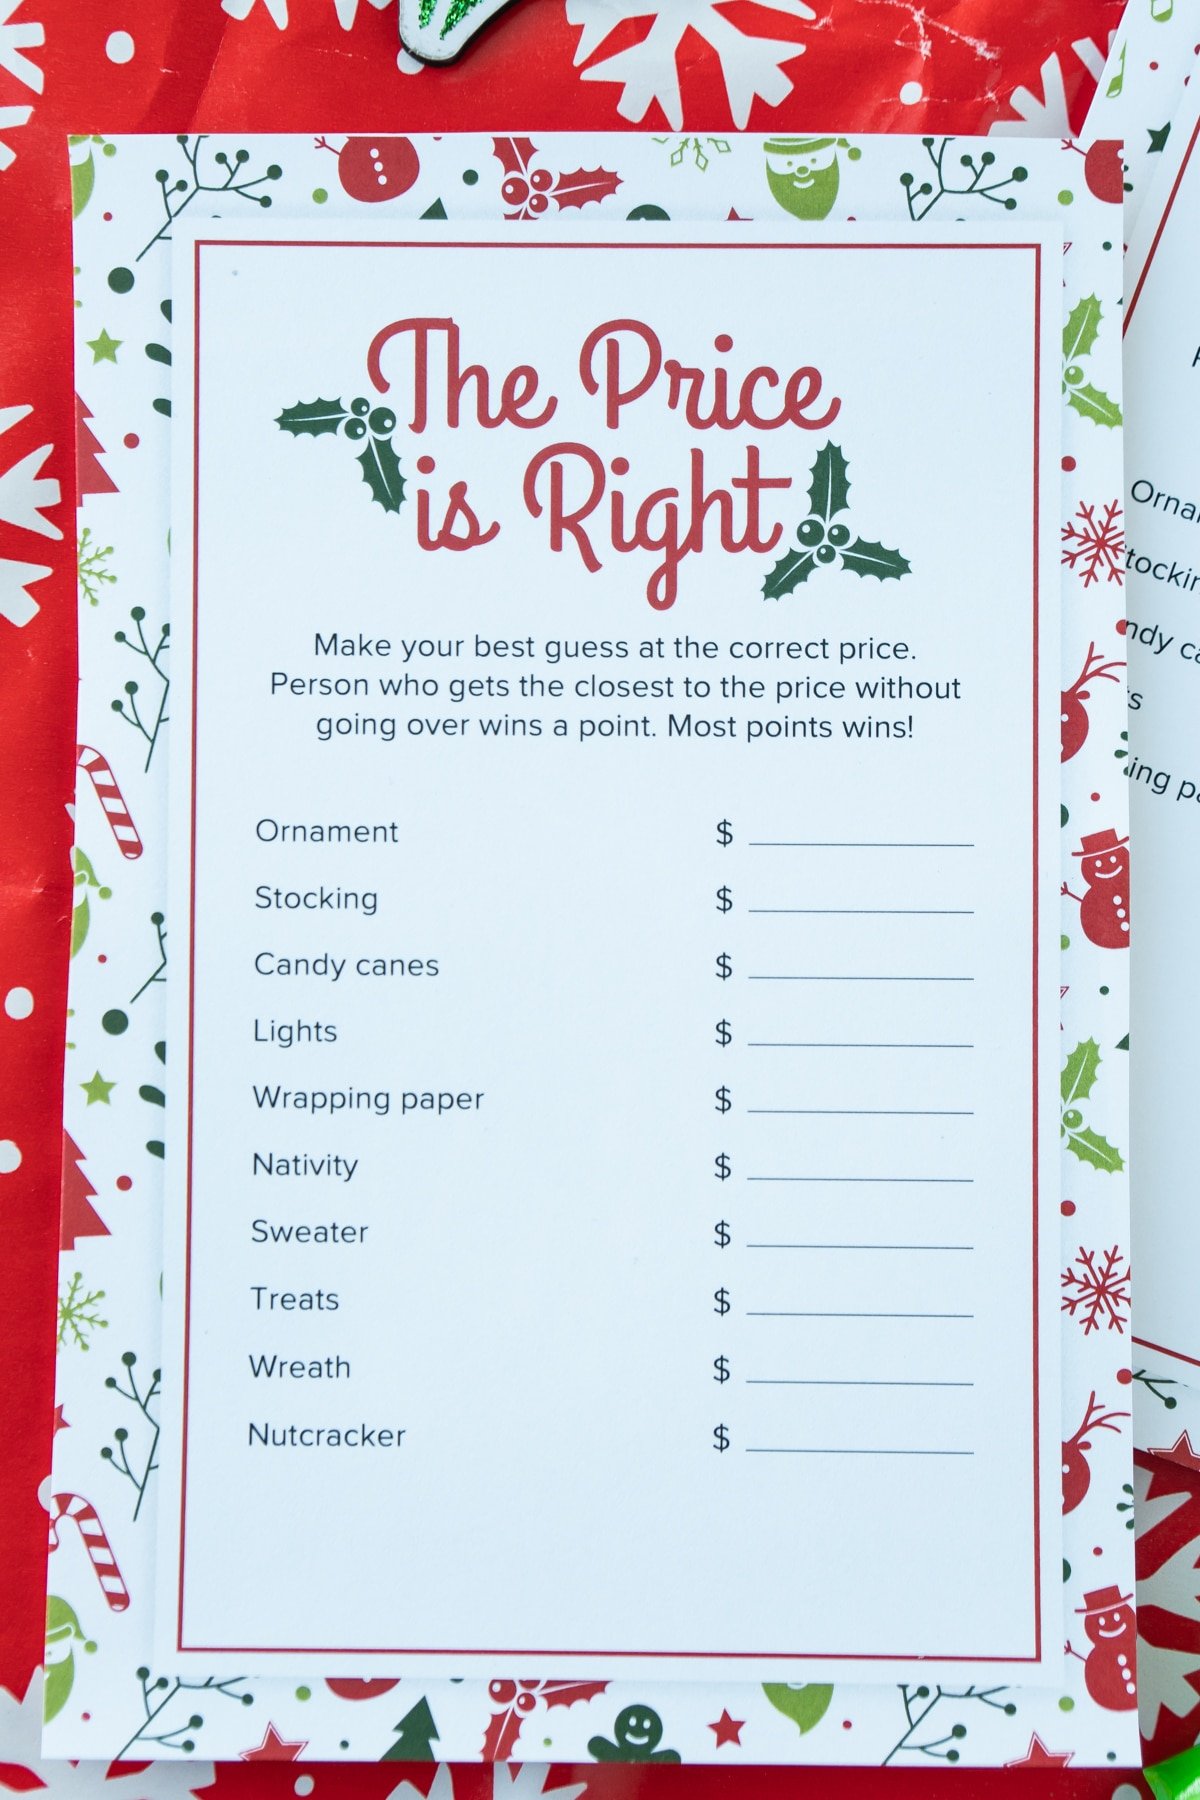 Printed out Christmas price is right game